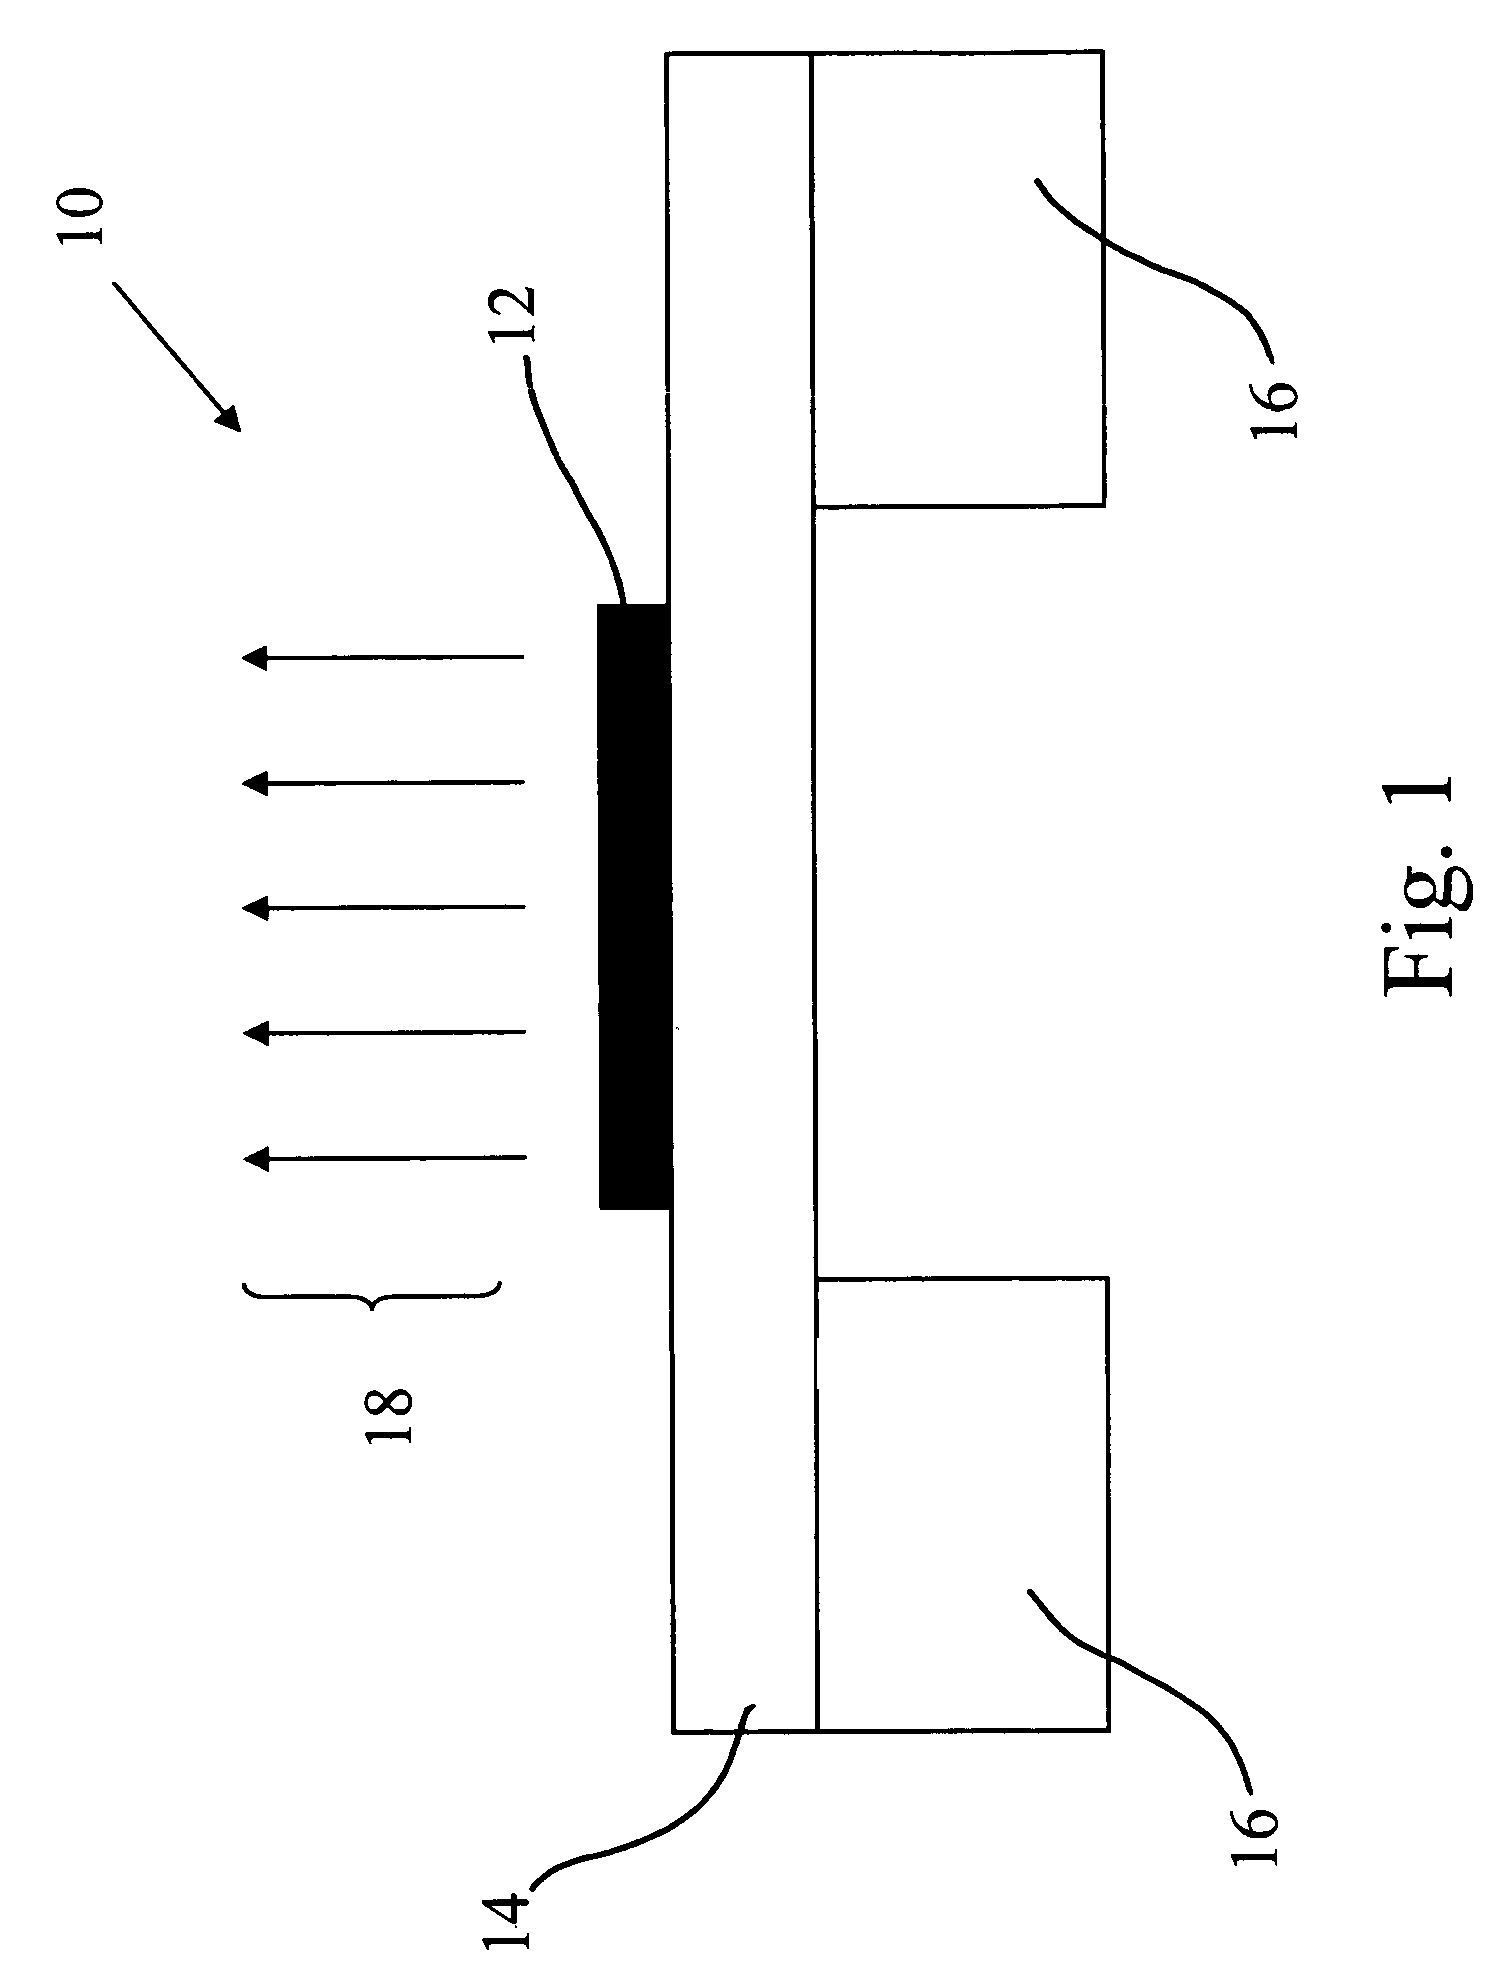 Method of forming pointed structures